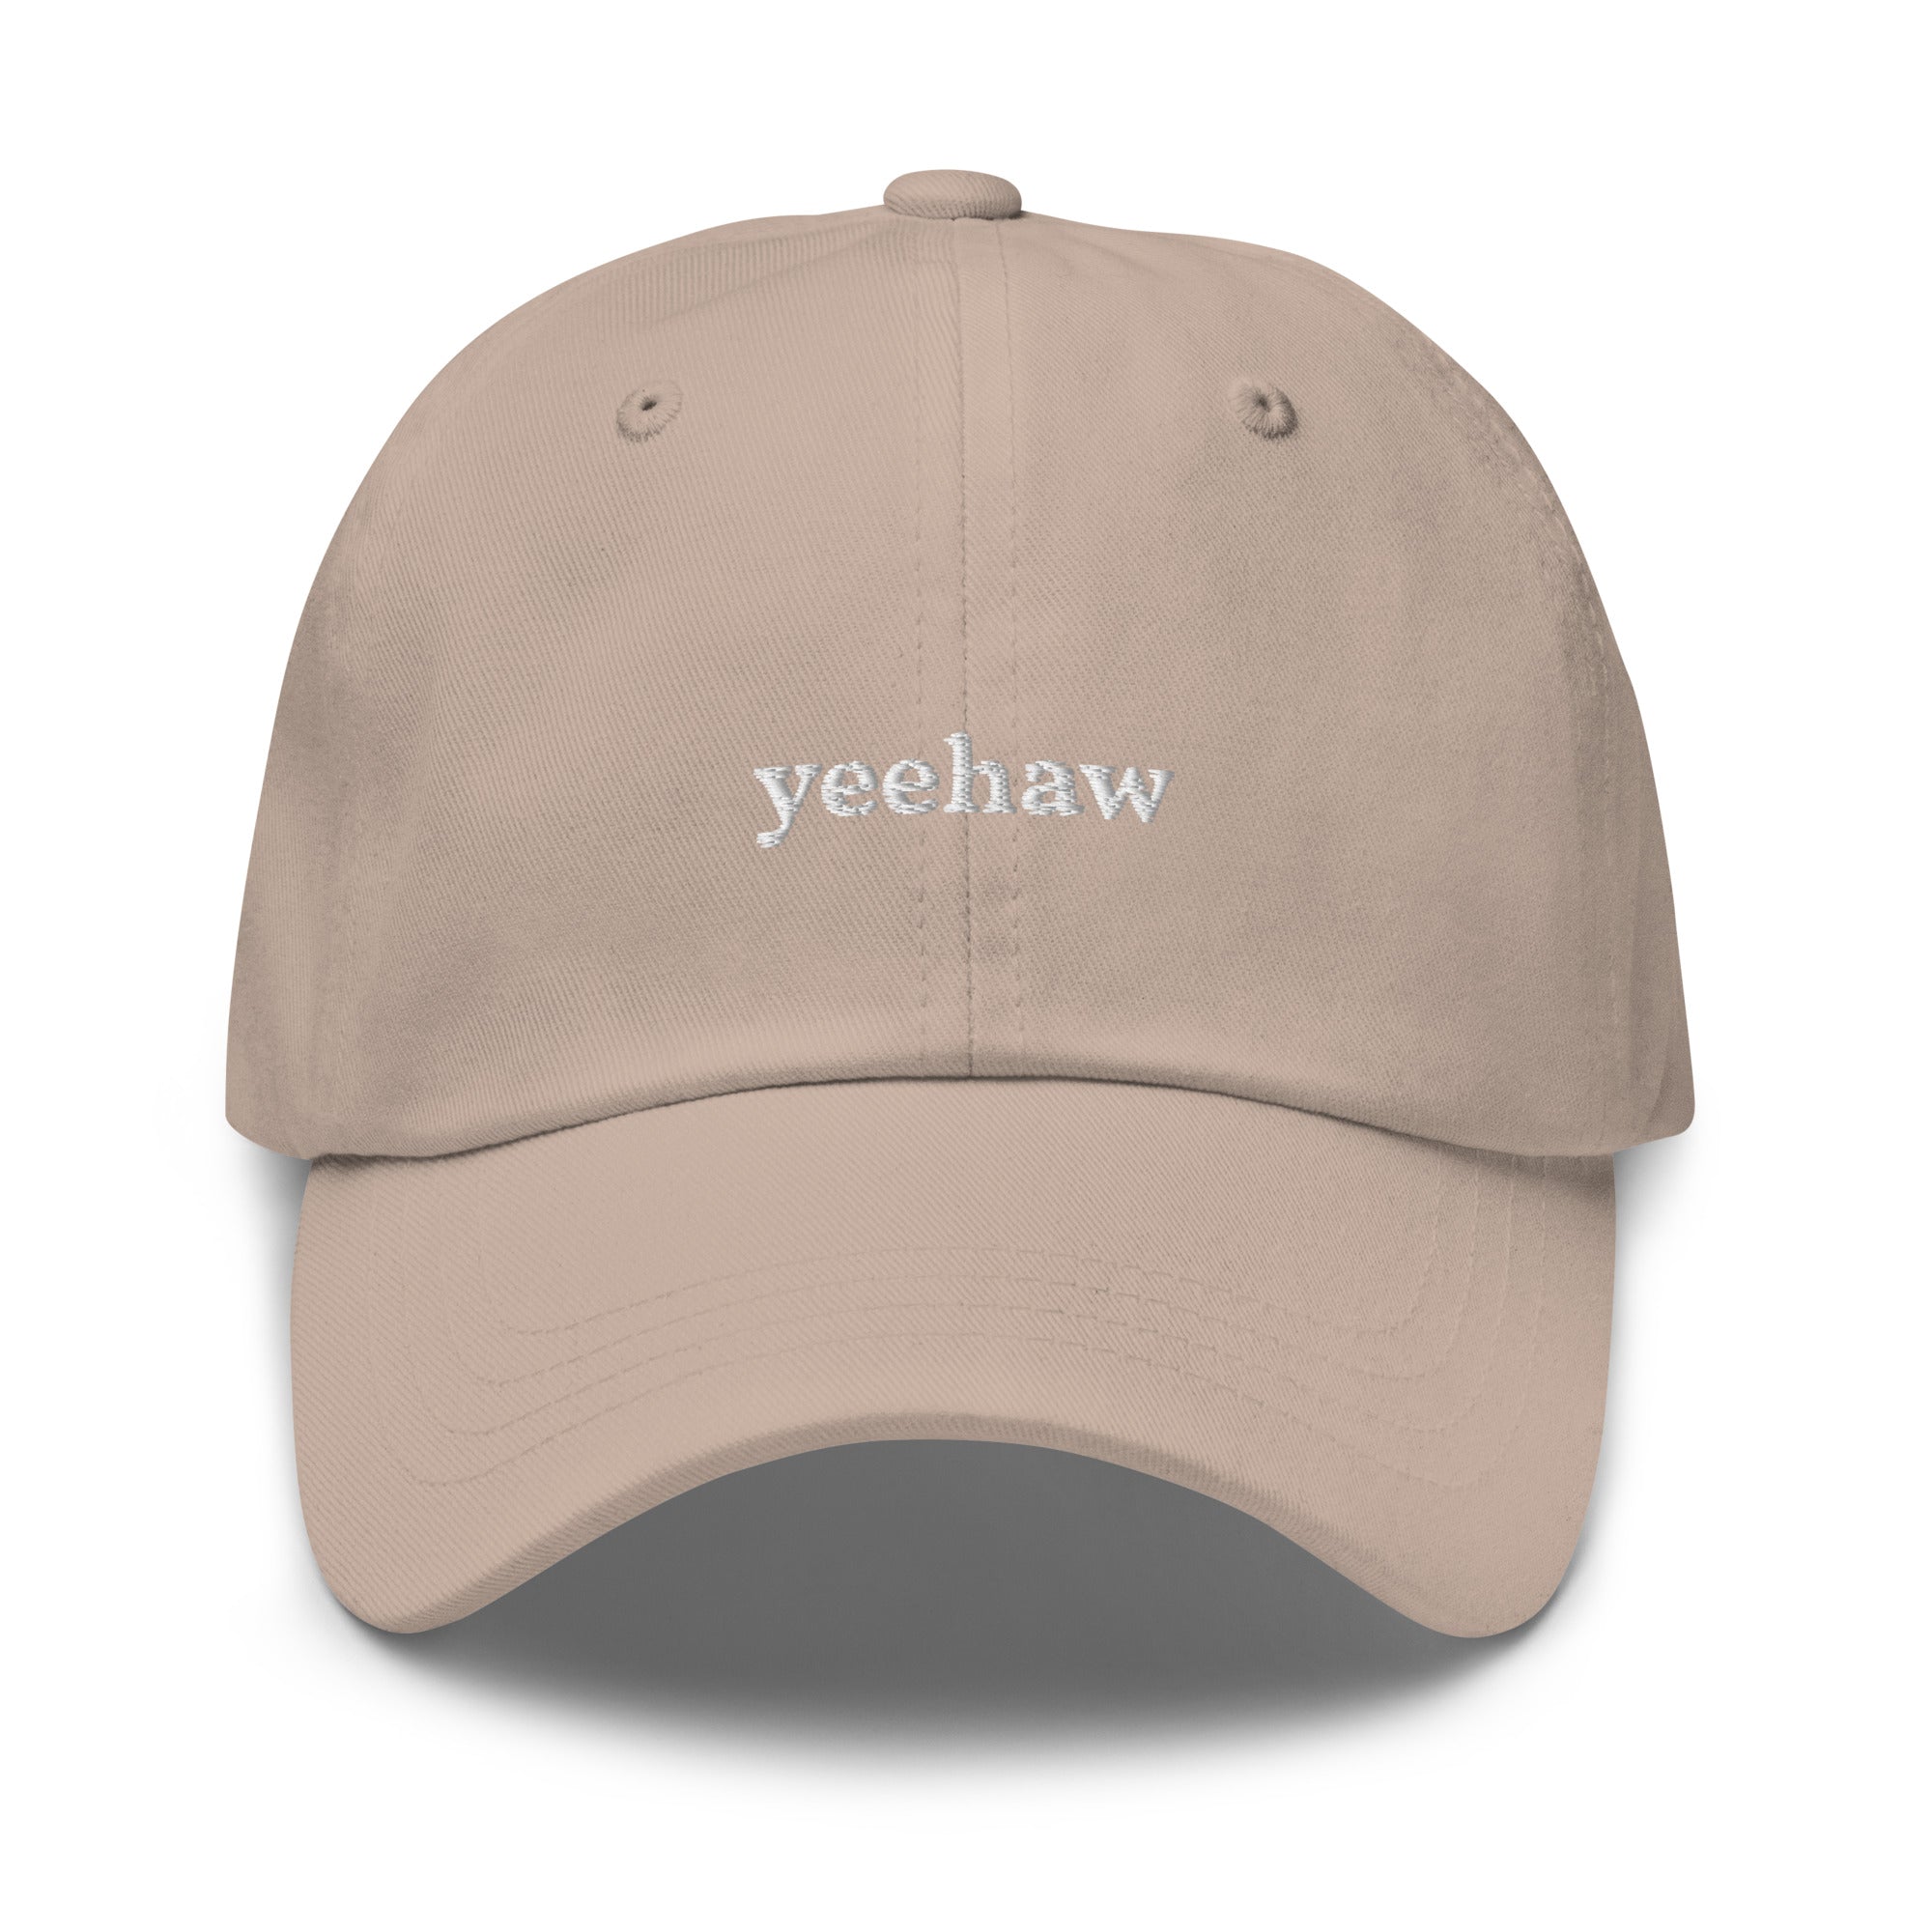 yeehaw dad hat